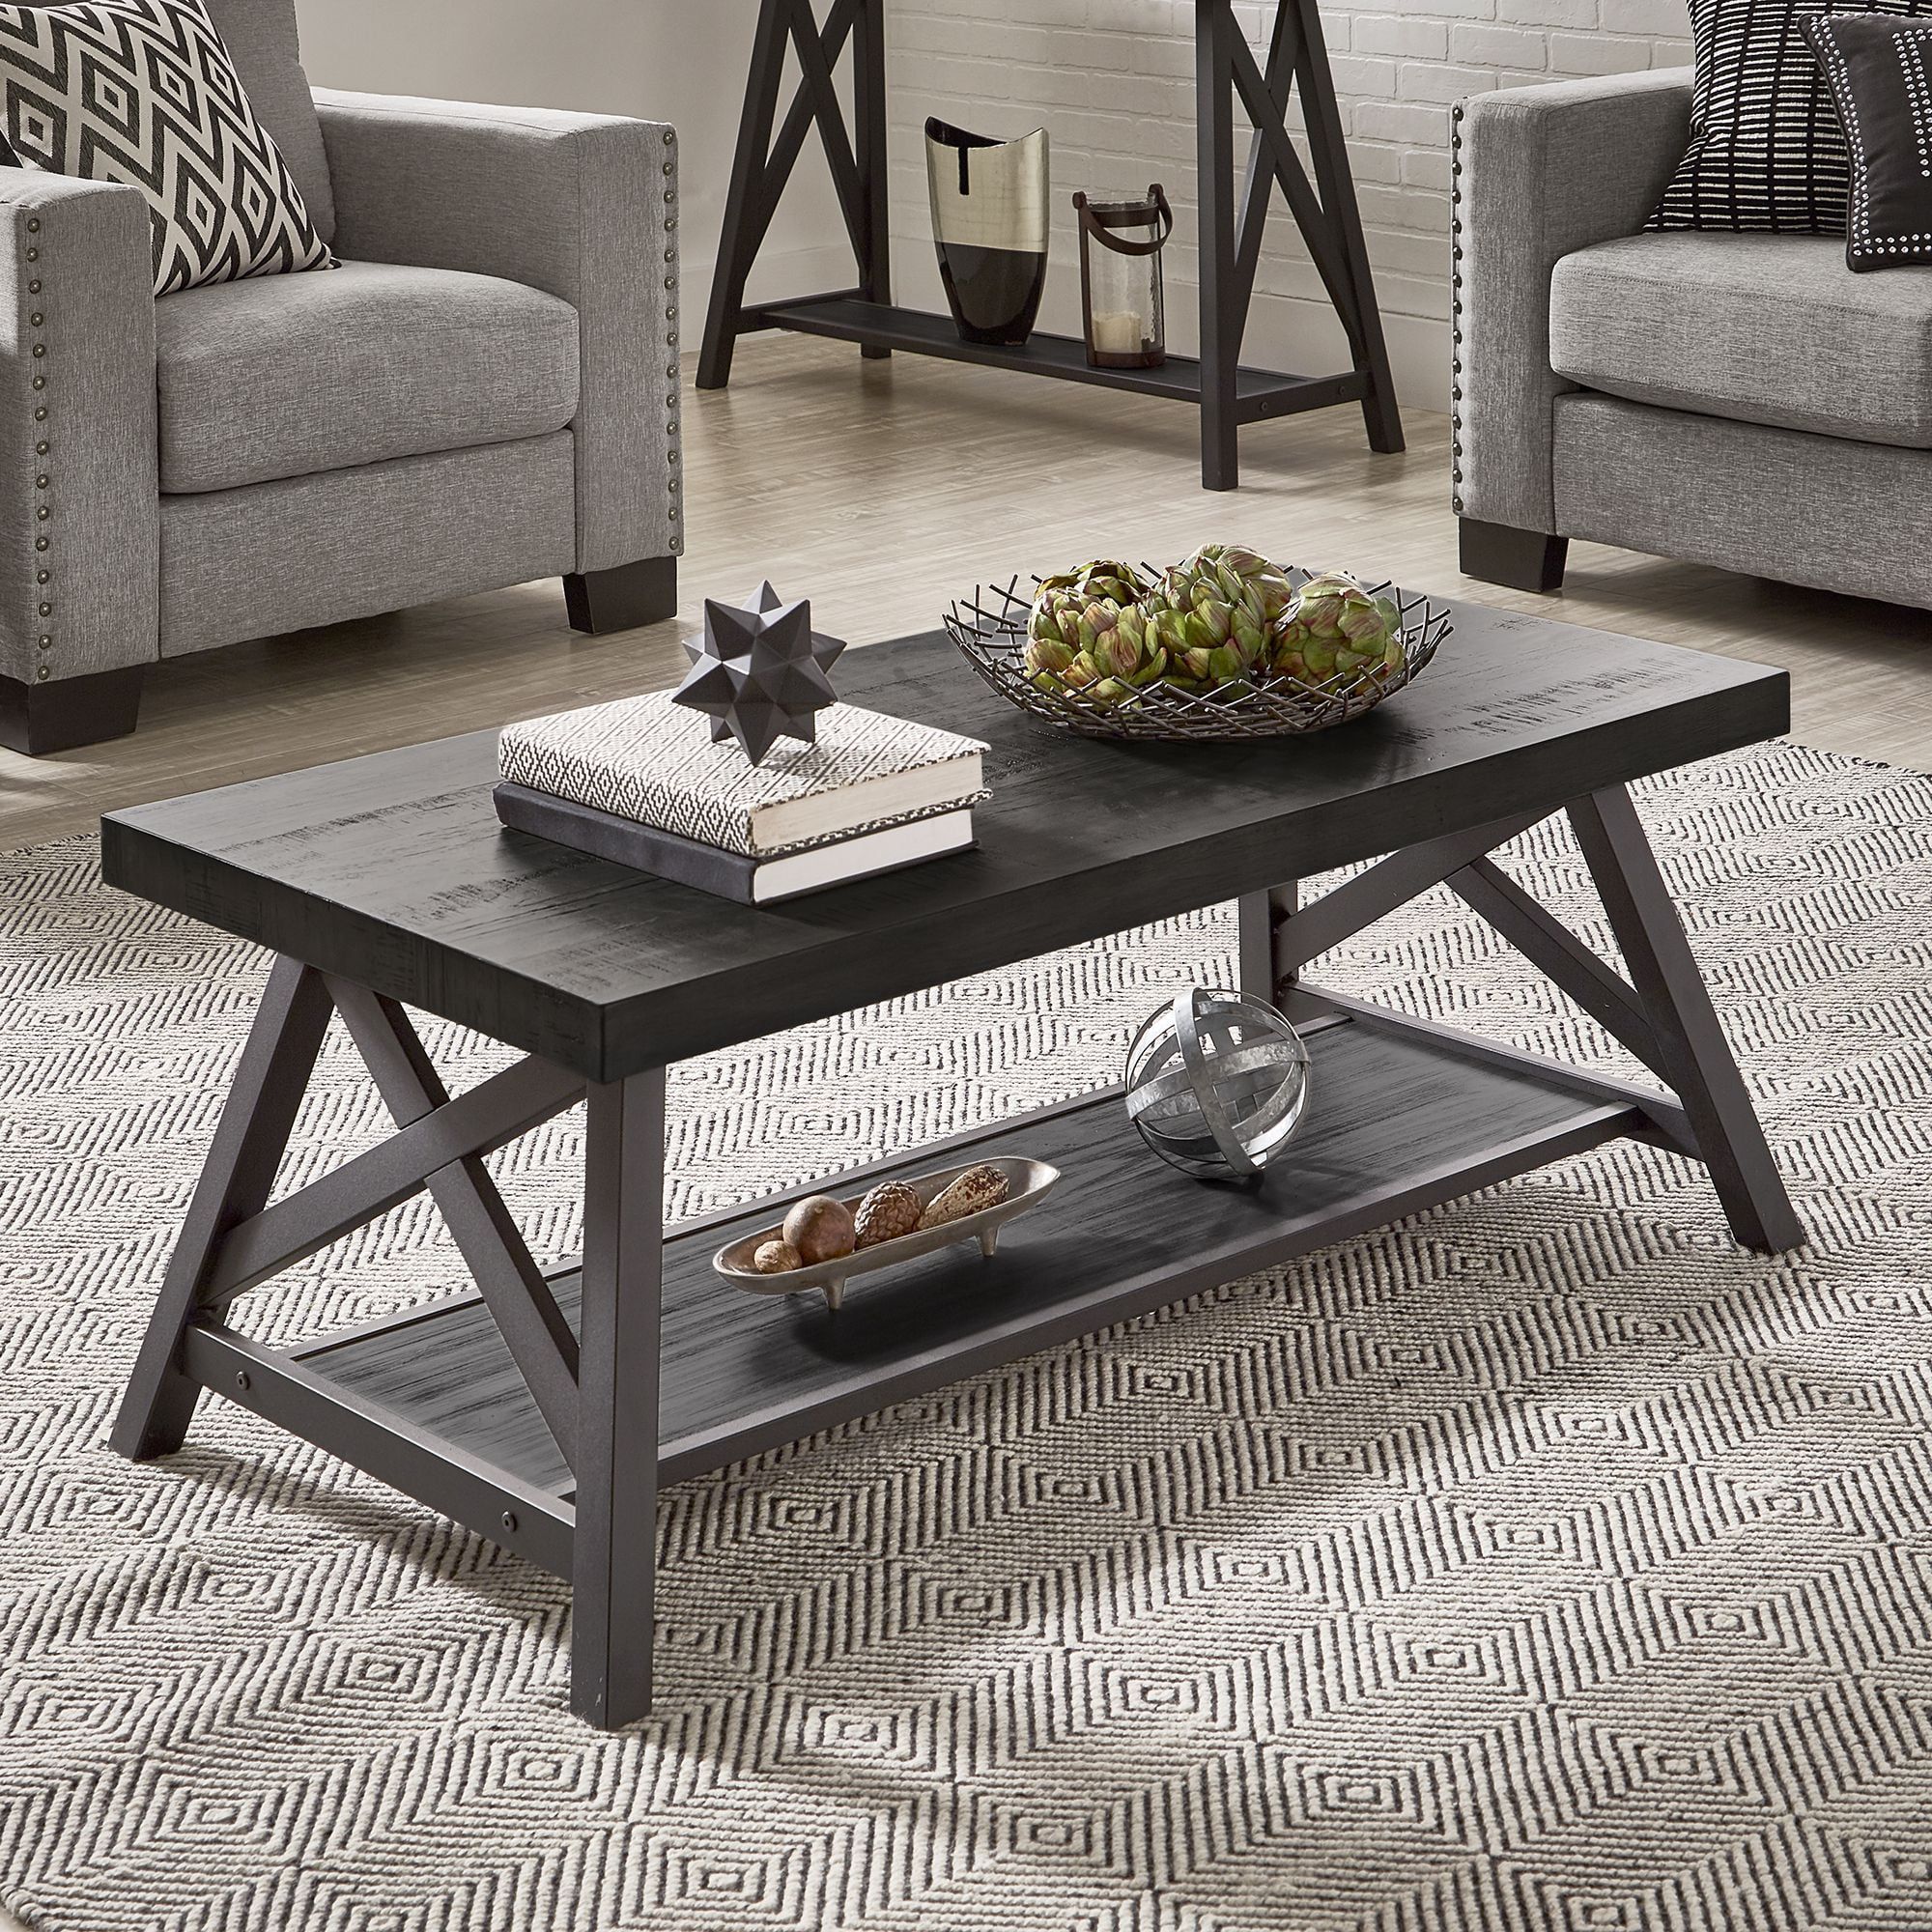 Weston Home Westyn Rustic X Base Wood Rectangular Coffee Table, Black –  Walmart In Rectangular Coffee Tables With Pedestal Bases (Photo 9 of 15)